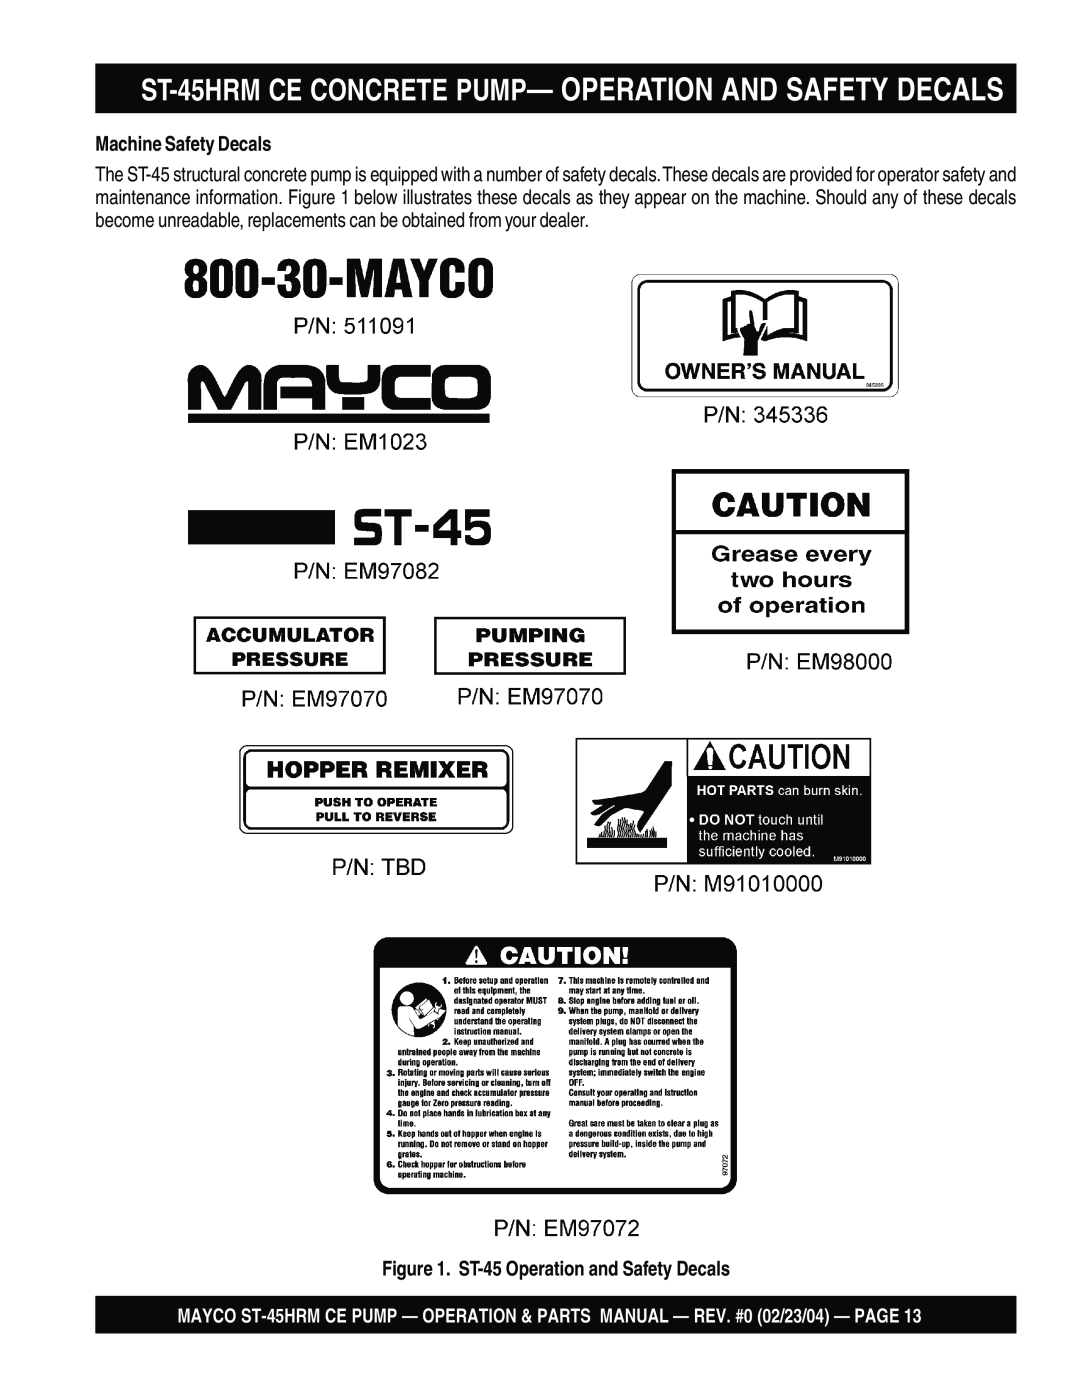 Multiquip ST-45HRM CE manual Machine Safety Decals, ST-45Operation and Safety Decals 